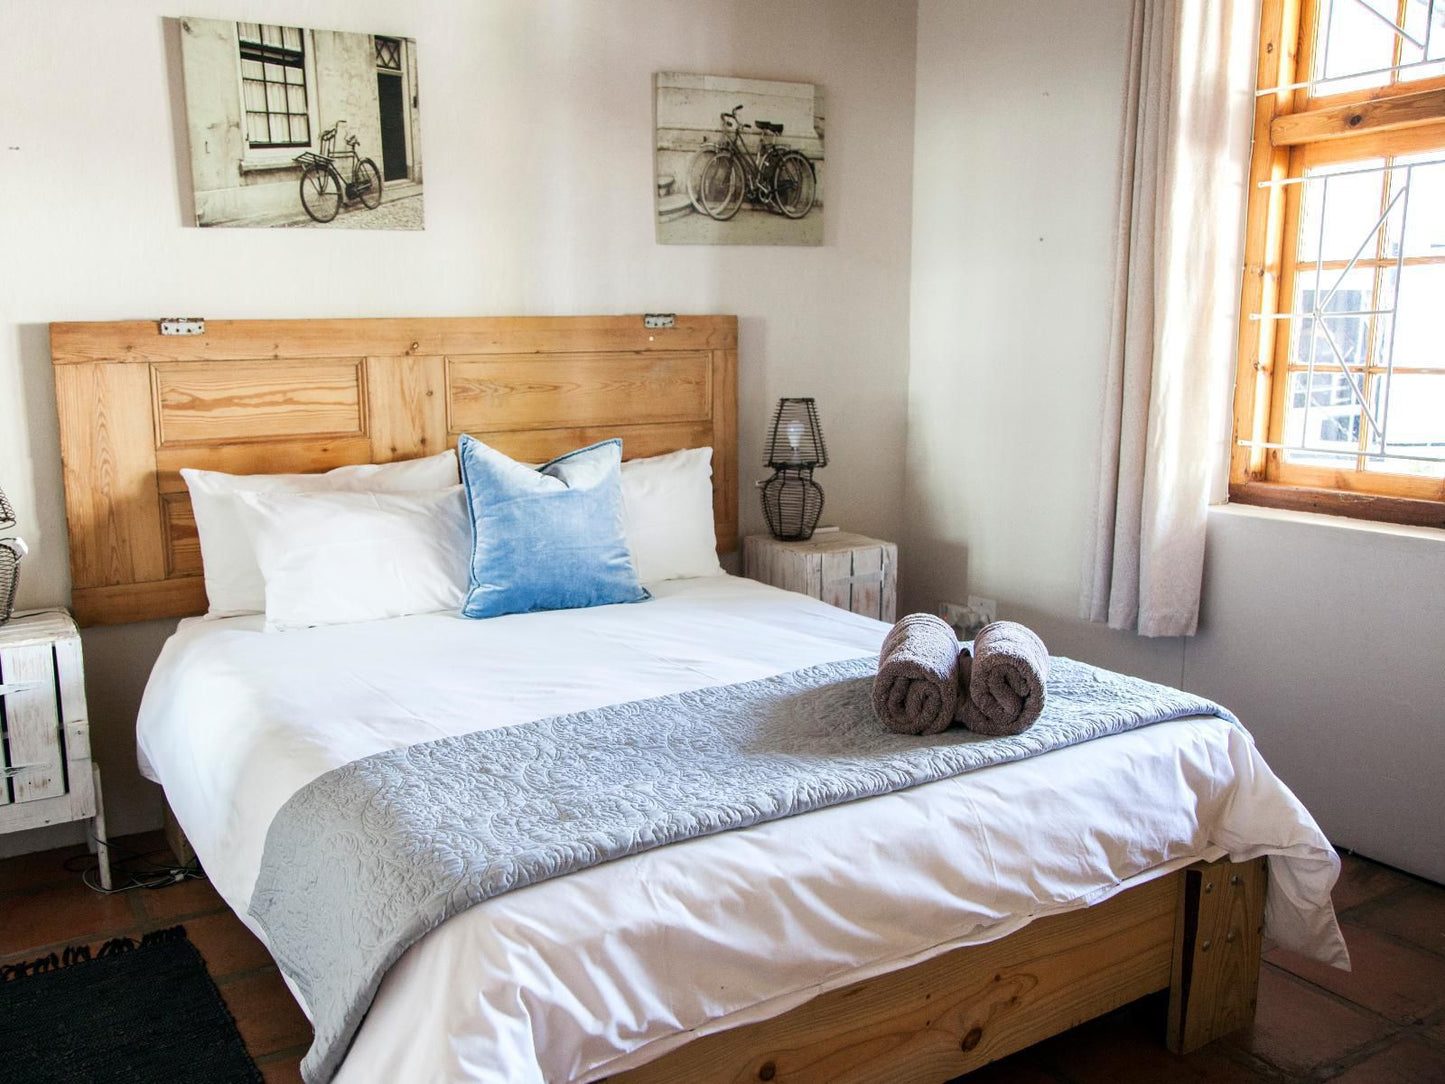 Bergsicht Country Town Cottages Tulbagh Western Cape South Africa Bedroom